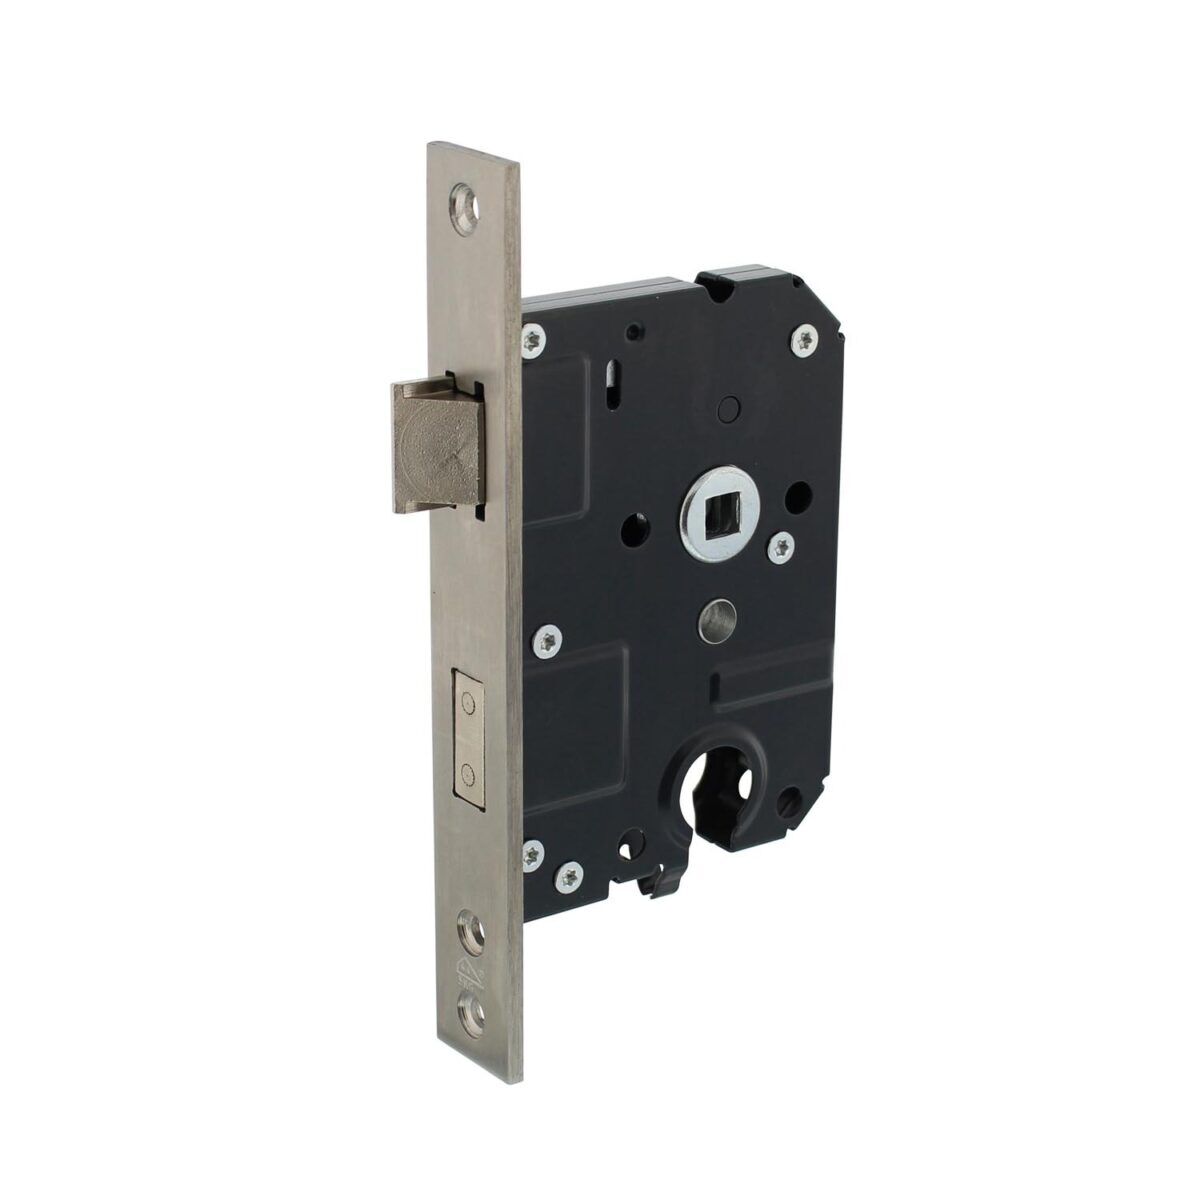 Intersteel Security lock SKG2 profile cylinder hole 55 mm with rectangular front plate 25 x 174 mm